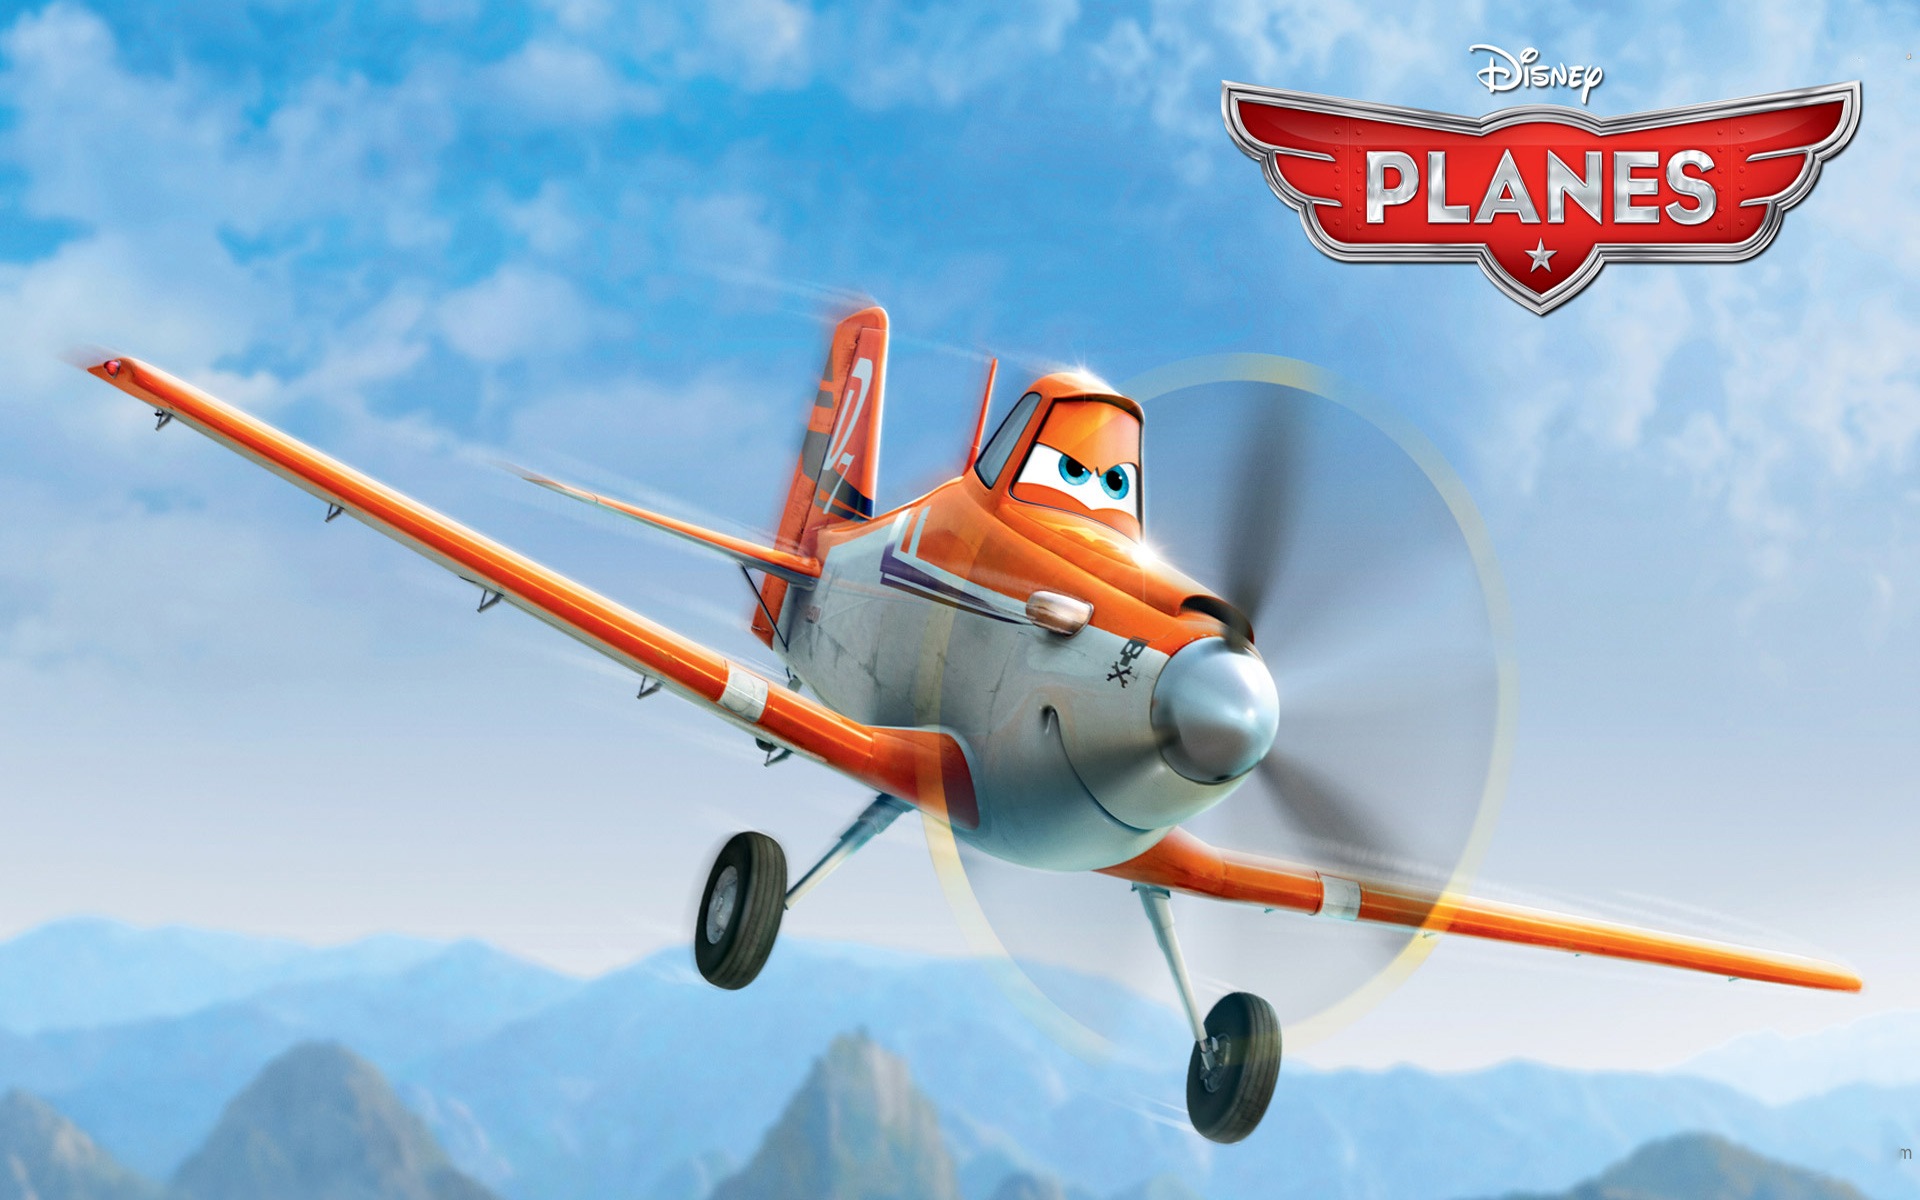 Planes 2013 HD wallpapers #15 - 1920x1200